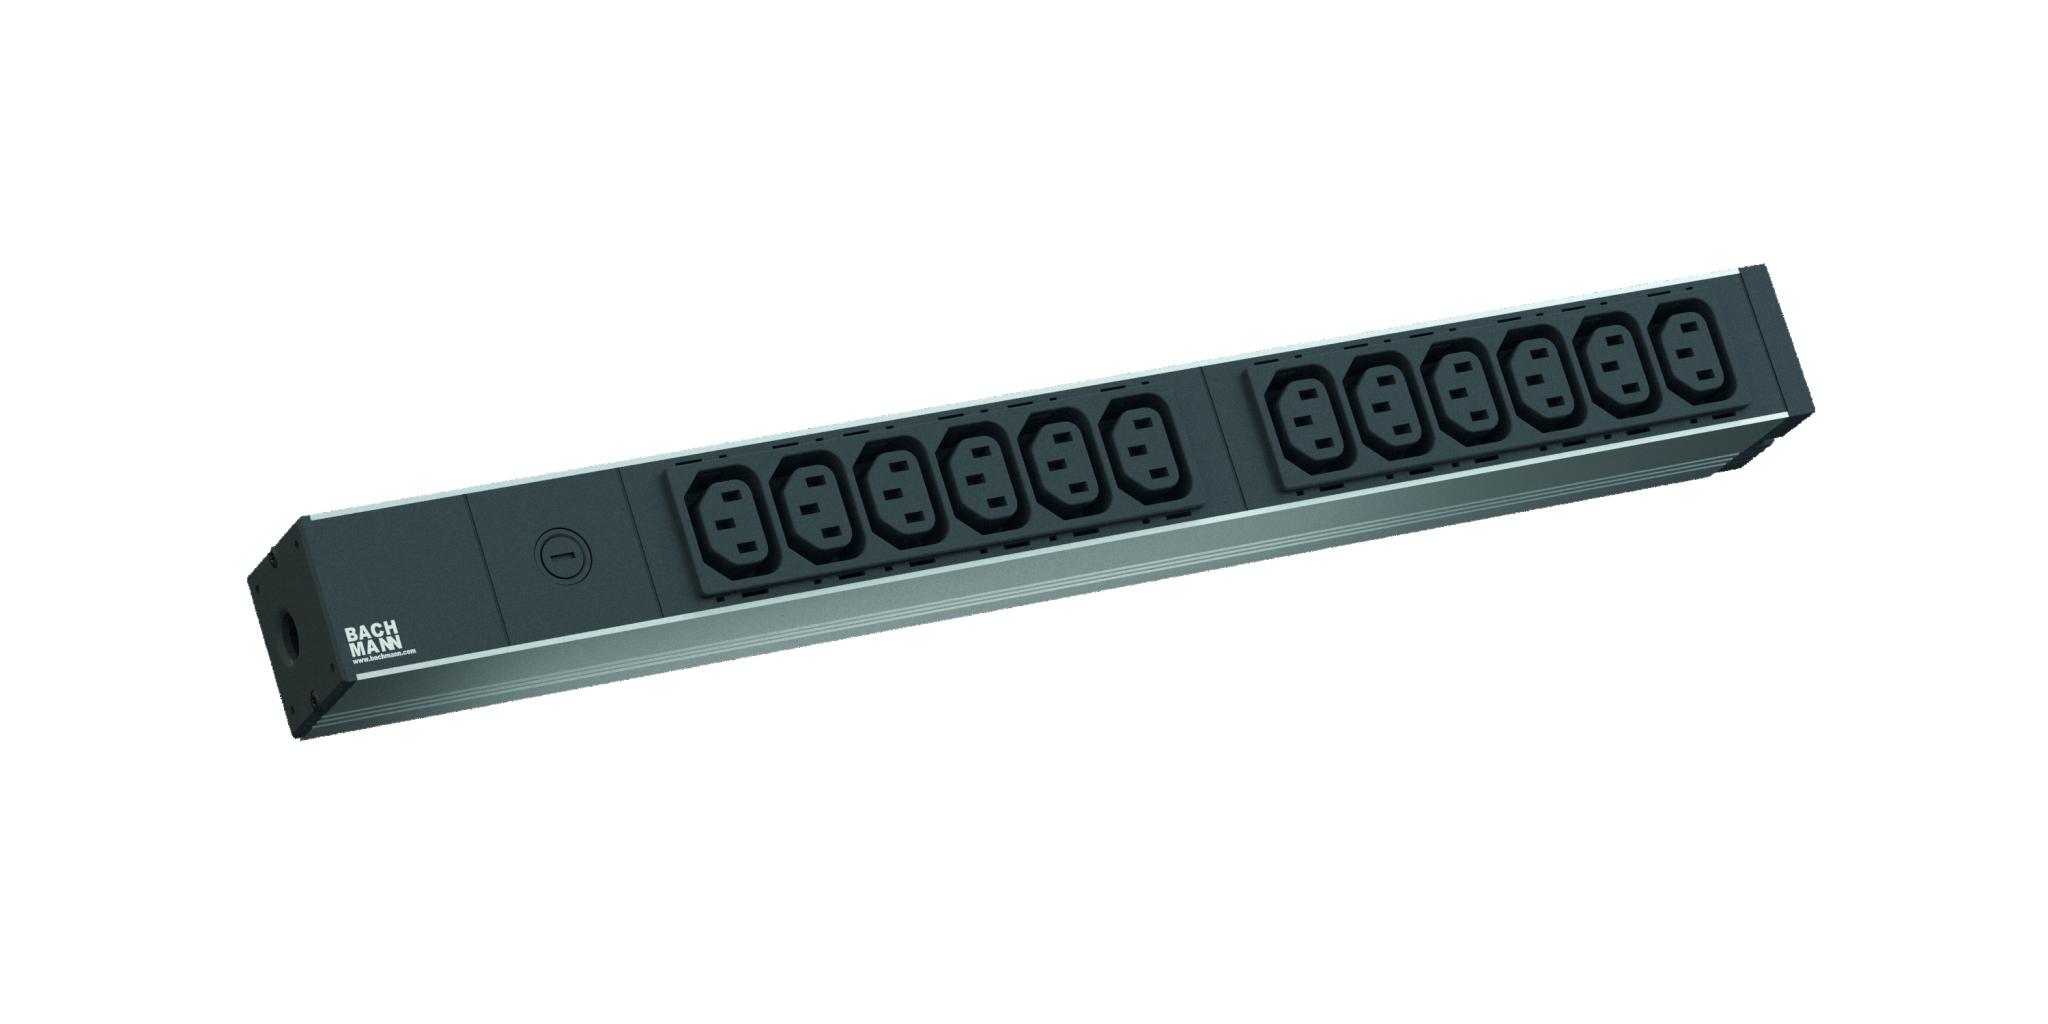 Bachmann IT PDU 12xC13 2,0m IEC C14 Stecker; IT PDU Basic 1U (230V / 50Hz); Suitable for 19 inch cabinet; Plug: C14 appliance plug; 12x C13 appliance sockets; Cable: 2,0m H05VV-F 3G 1,50 mm²; Rated voltage: 230V; Current per phase: 16A; Non-rewirable; Microfuse: 10A;